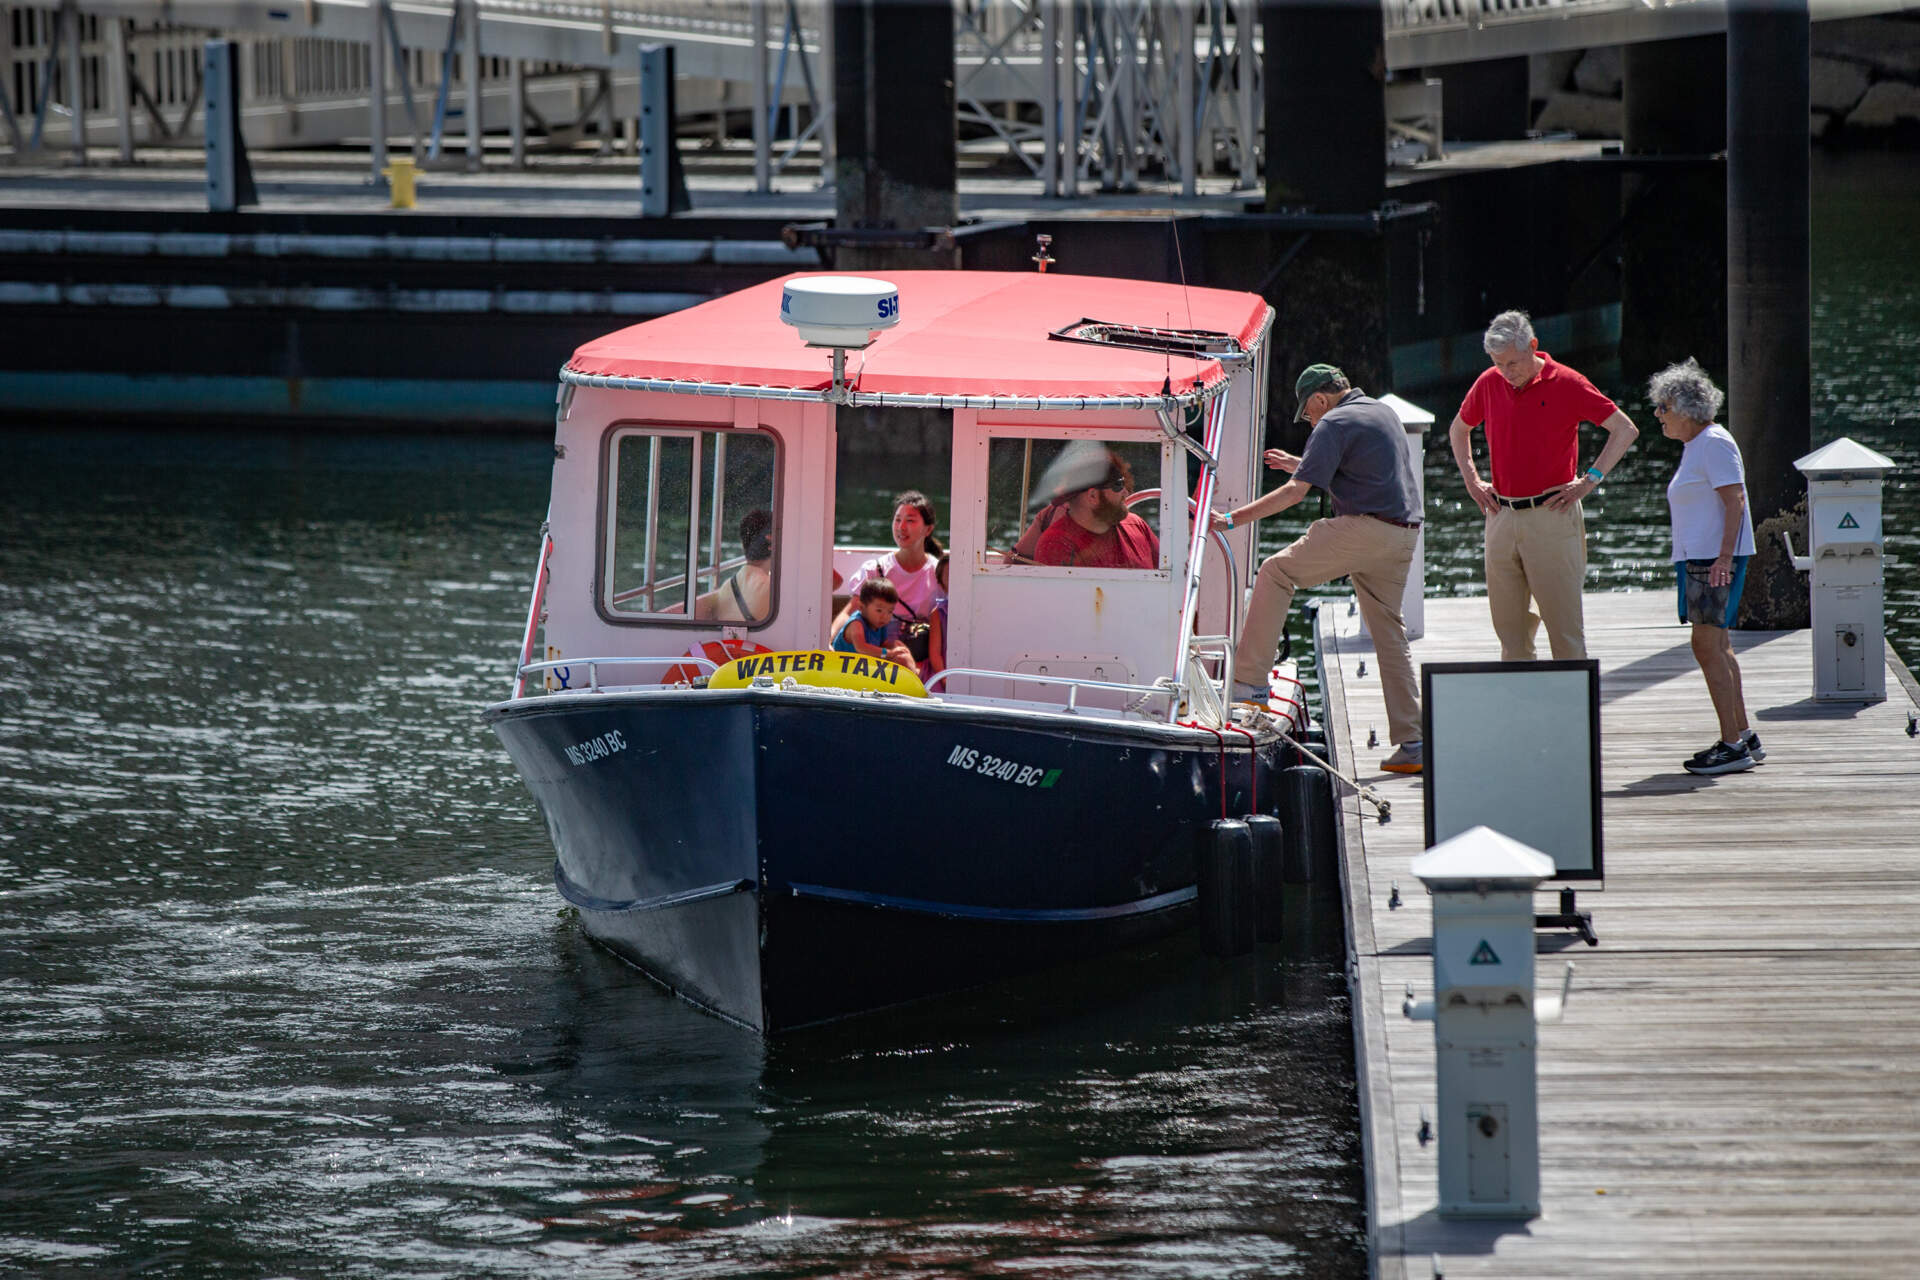 People climb aboard a water taxi bound for East Boston at Fan Pier in the Seaport. (Jesse Costa/WBUR)